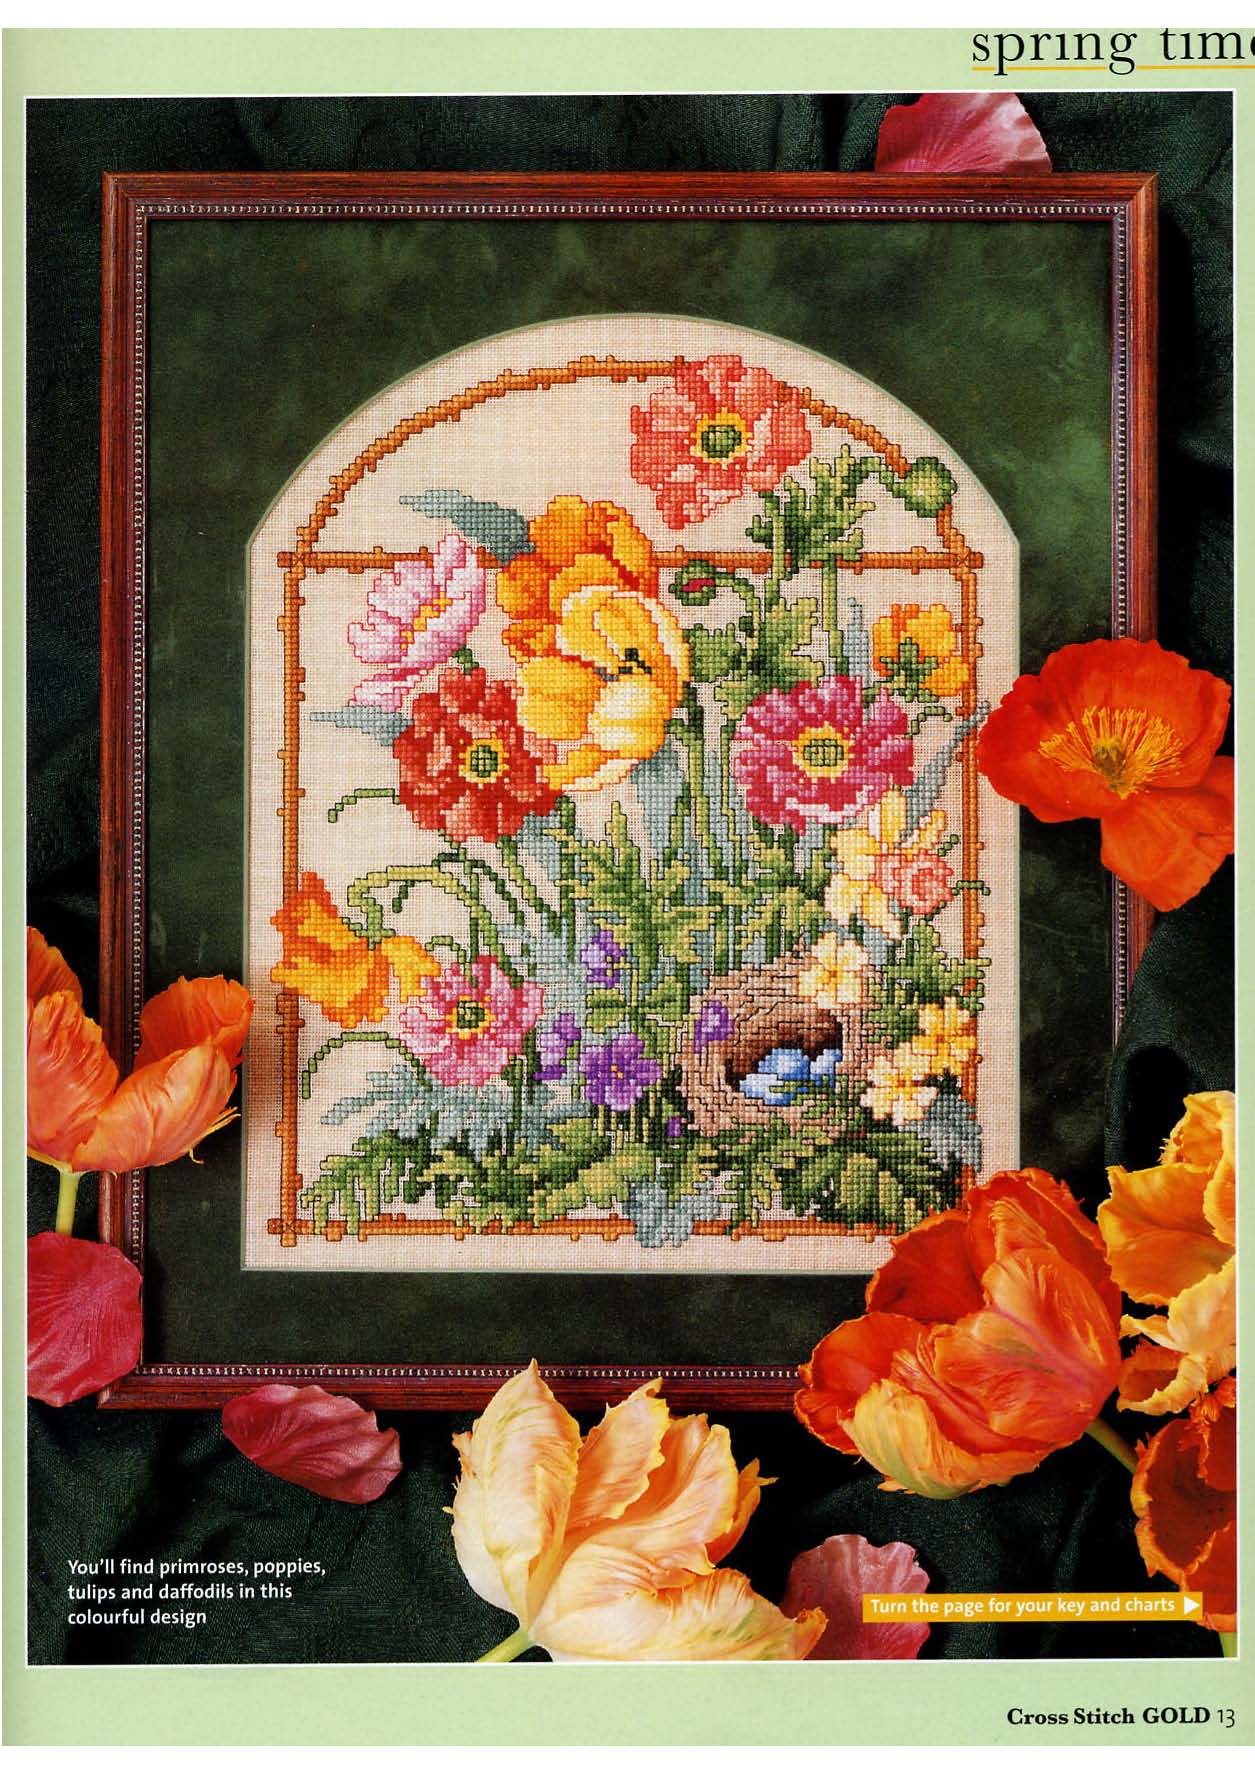 Home cross stitch painting with floral window (1)